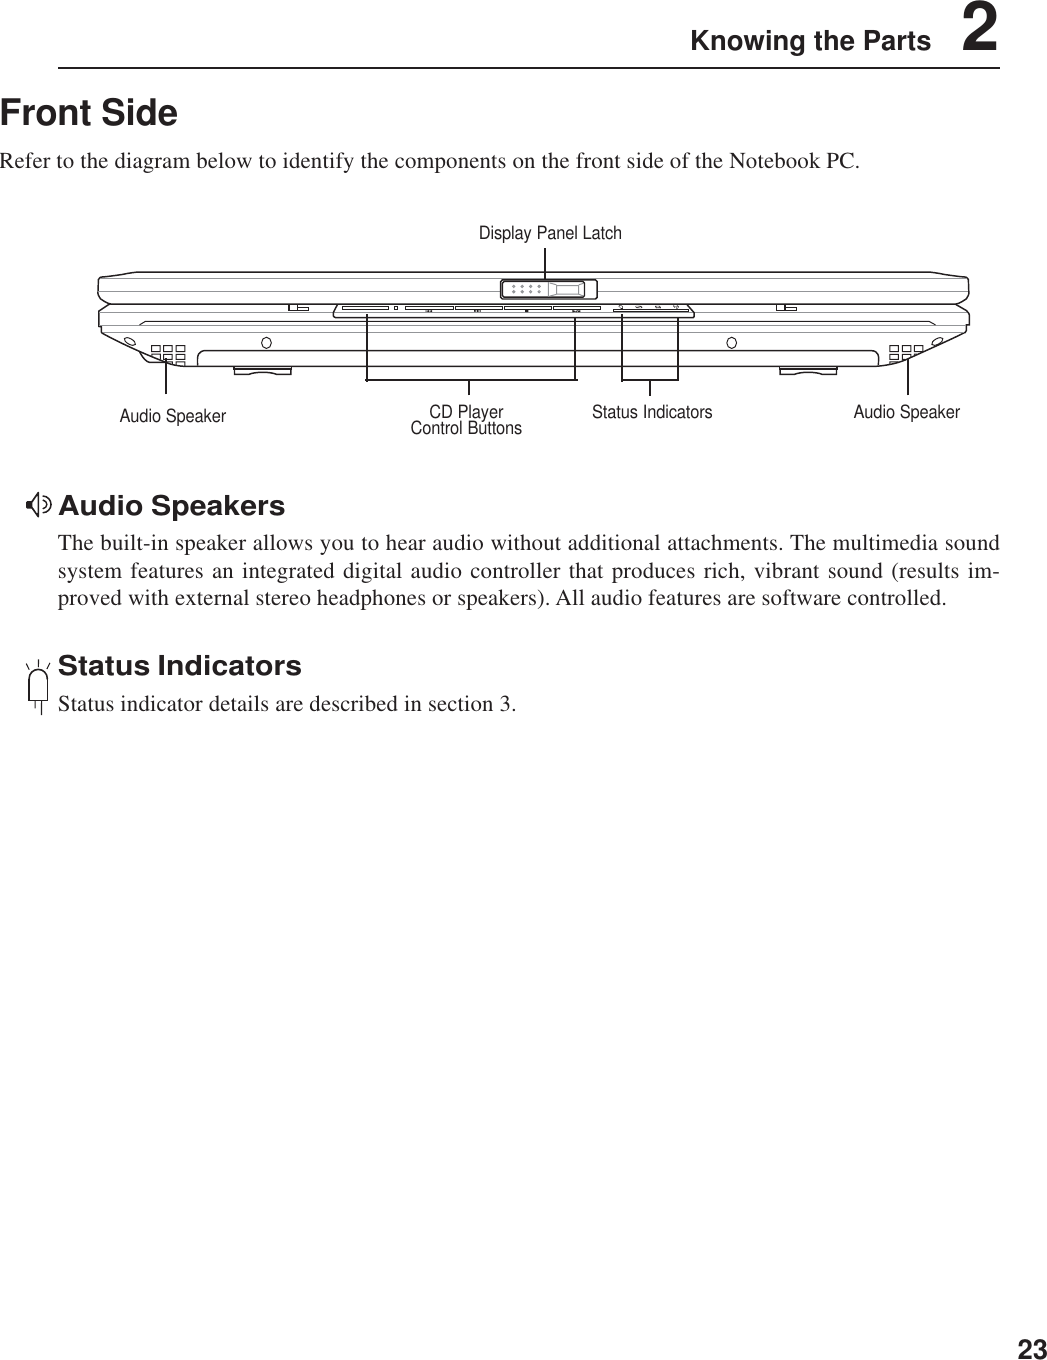 23Knowing the Parts    2Front SideRefer to the diagram below to identify the components on the front side of the Notebook PC.Status IndicatorsStatus indicator details are described in section 3.Audio SpeakersThe built-in speaker allows you to hear audio without additional attachments. The multimedia soundsystem features an integrated digital audio controller that produces rich, vibrant sound (results im-proved with external stereo headphones or speakers). All audio features are software controlled.Display Panel LatchStatus IndicatorsCD PlayerControl Buttons Audio SpeakerAudio Speaker